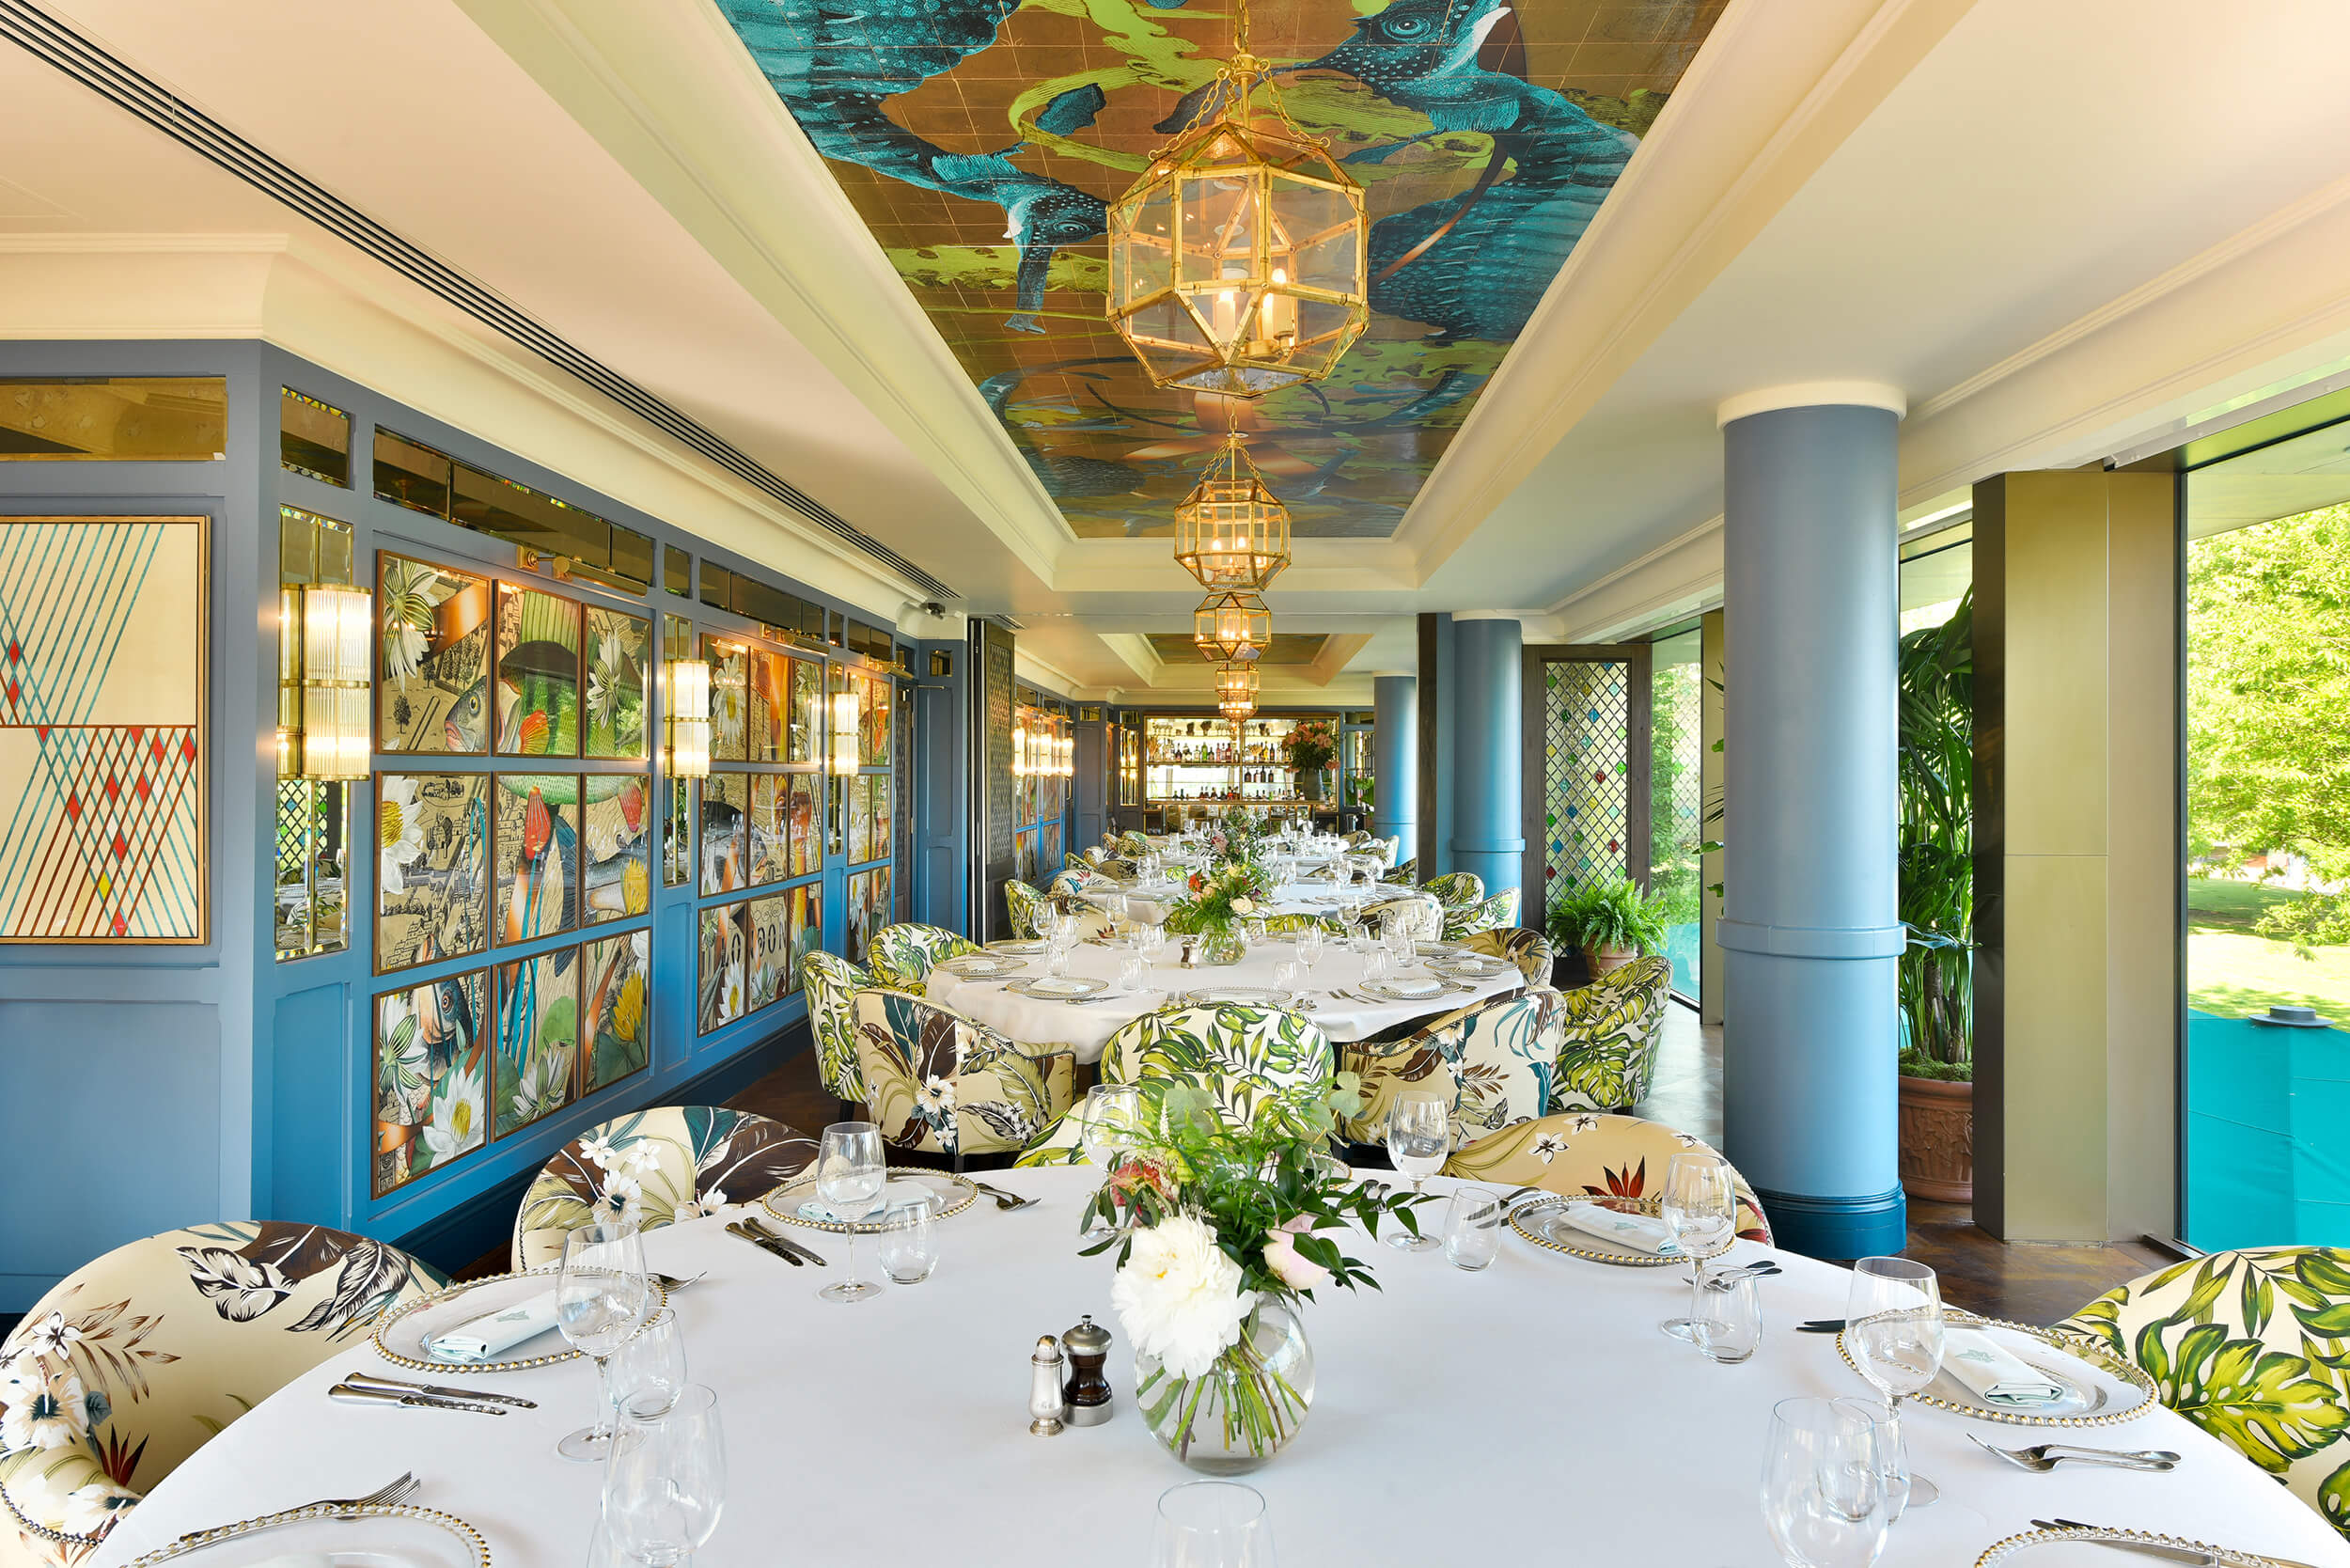 Dining space - The Ivy